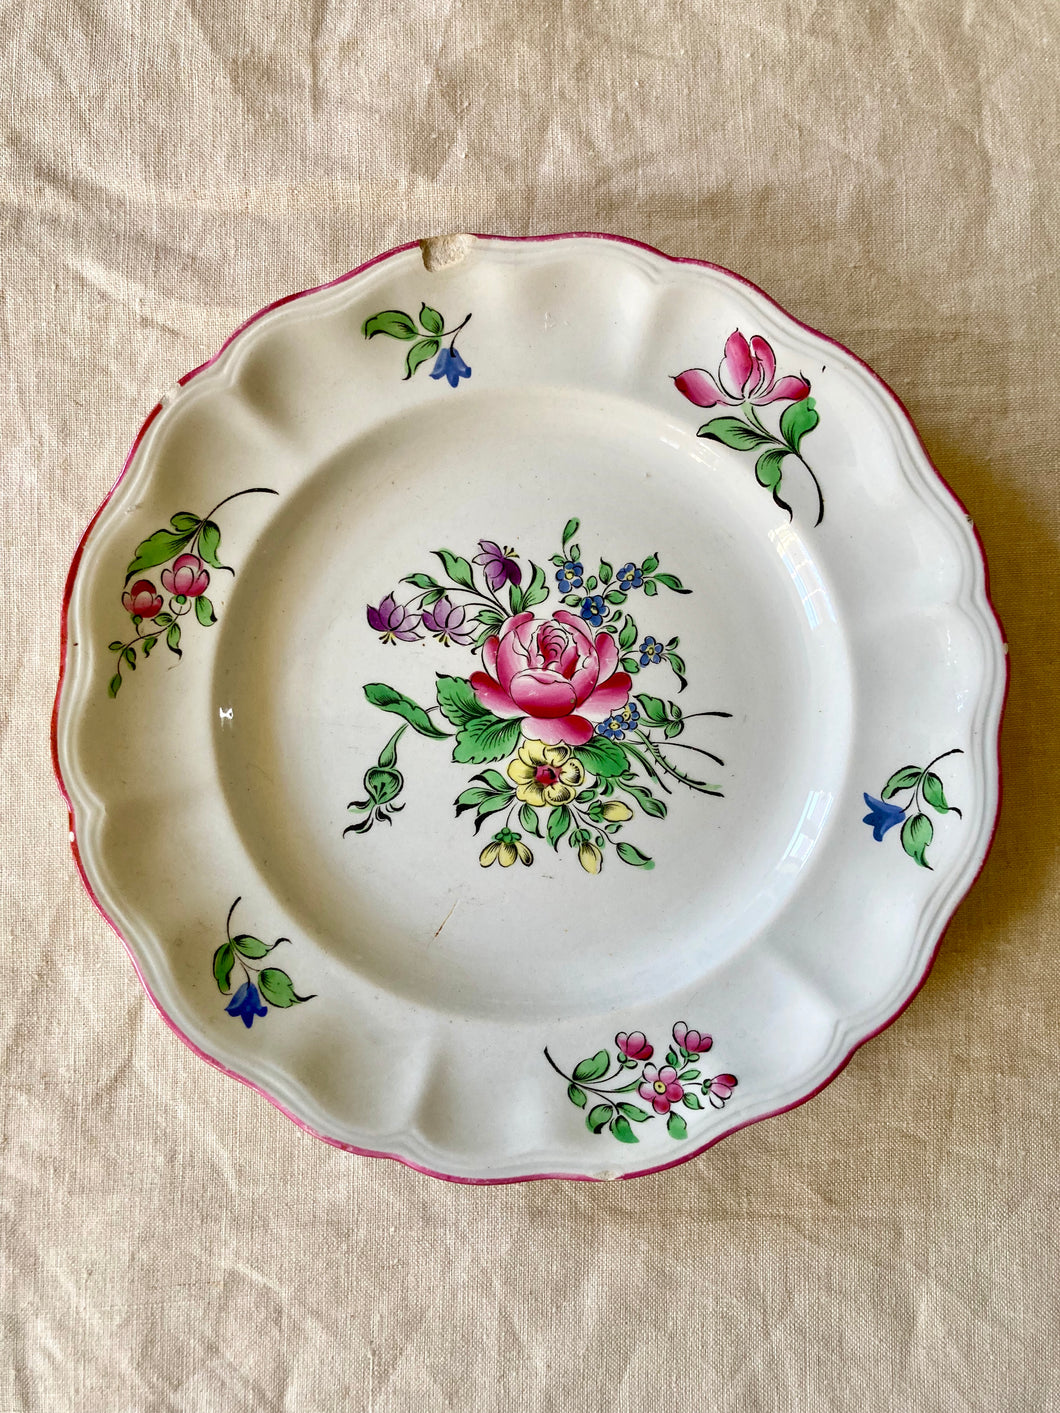 A set of 5 Luneville Faience dinner plates